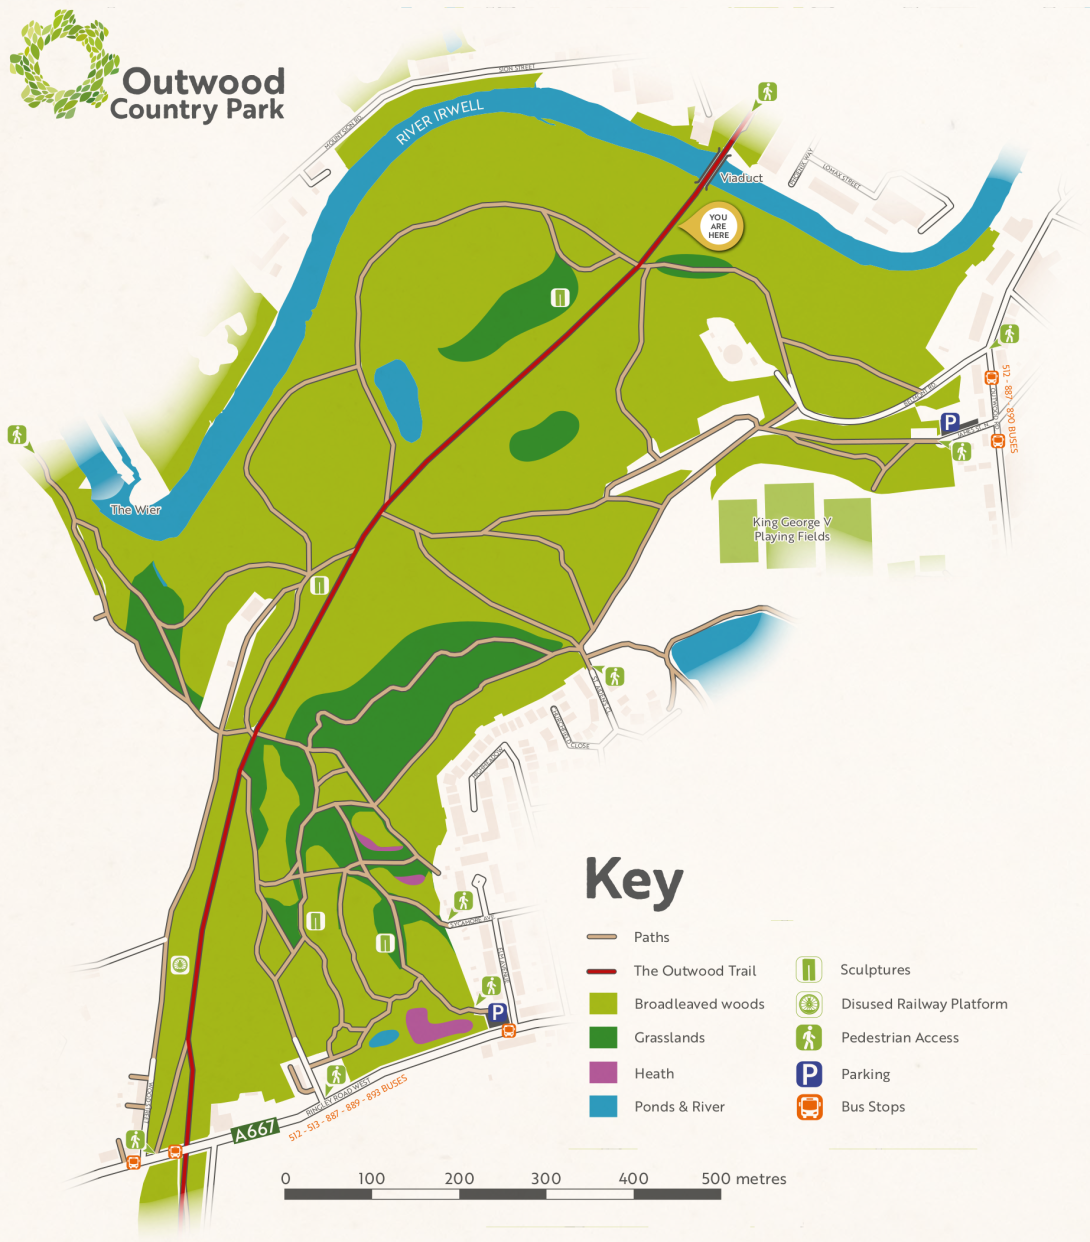 About the Park | Outwood Country Park